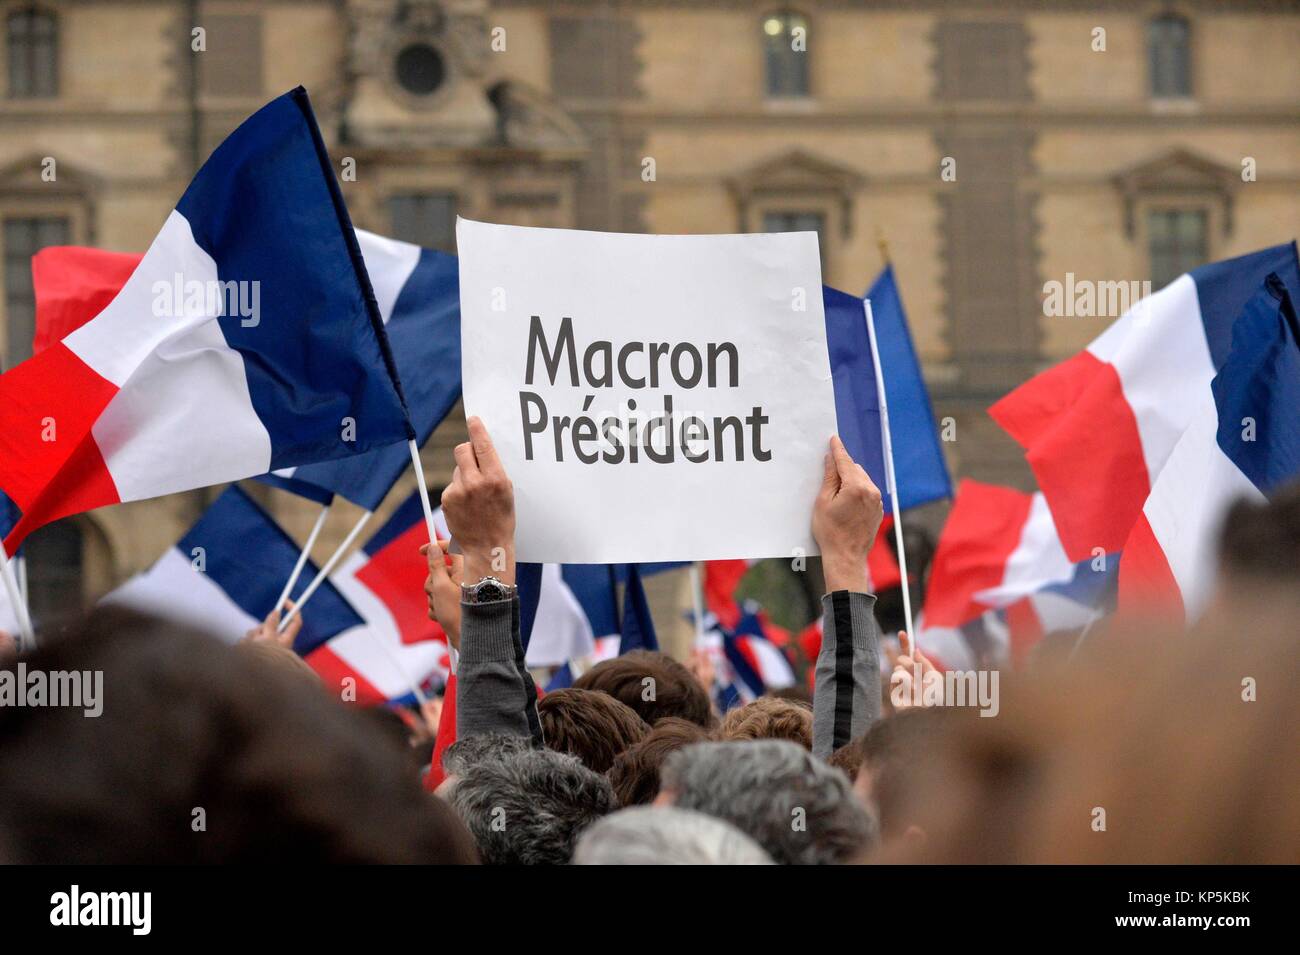 Macron supporters celebrate his victory outside the Louvre museum in Paris,France. Stock Photo